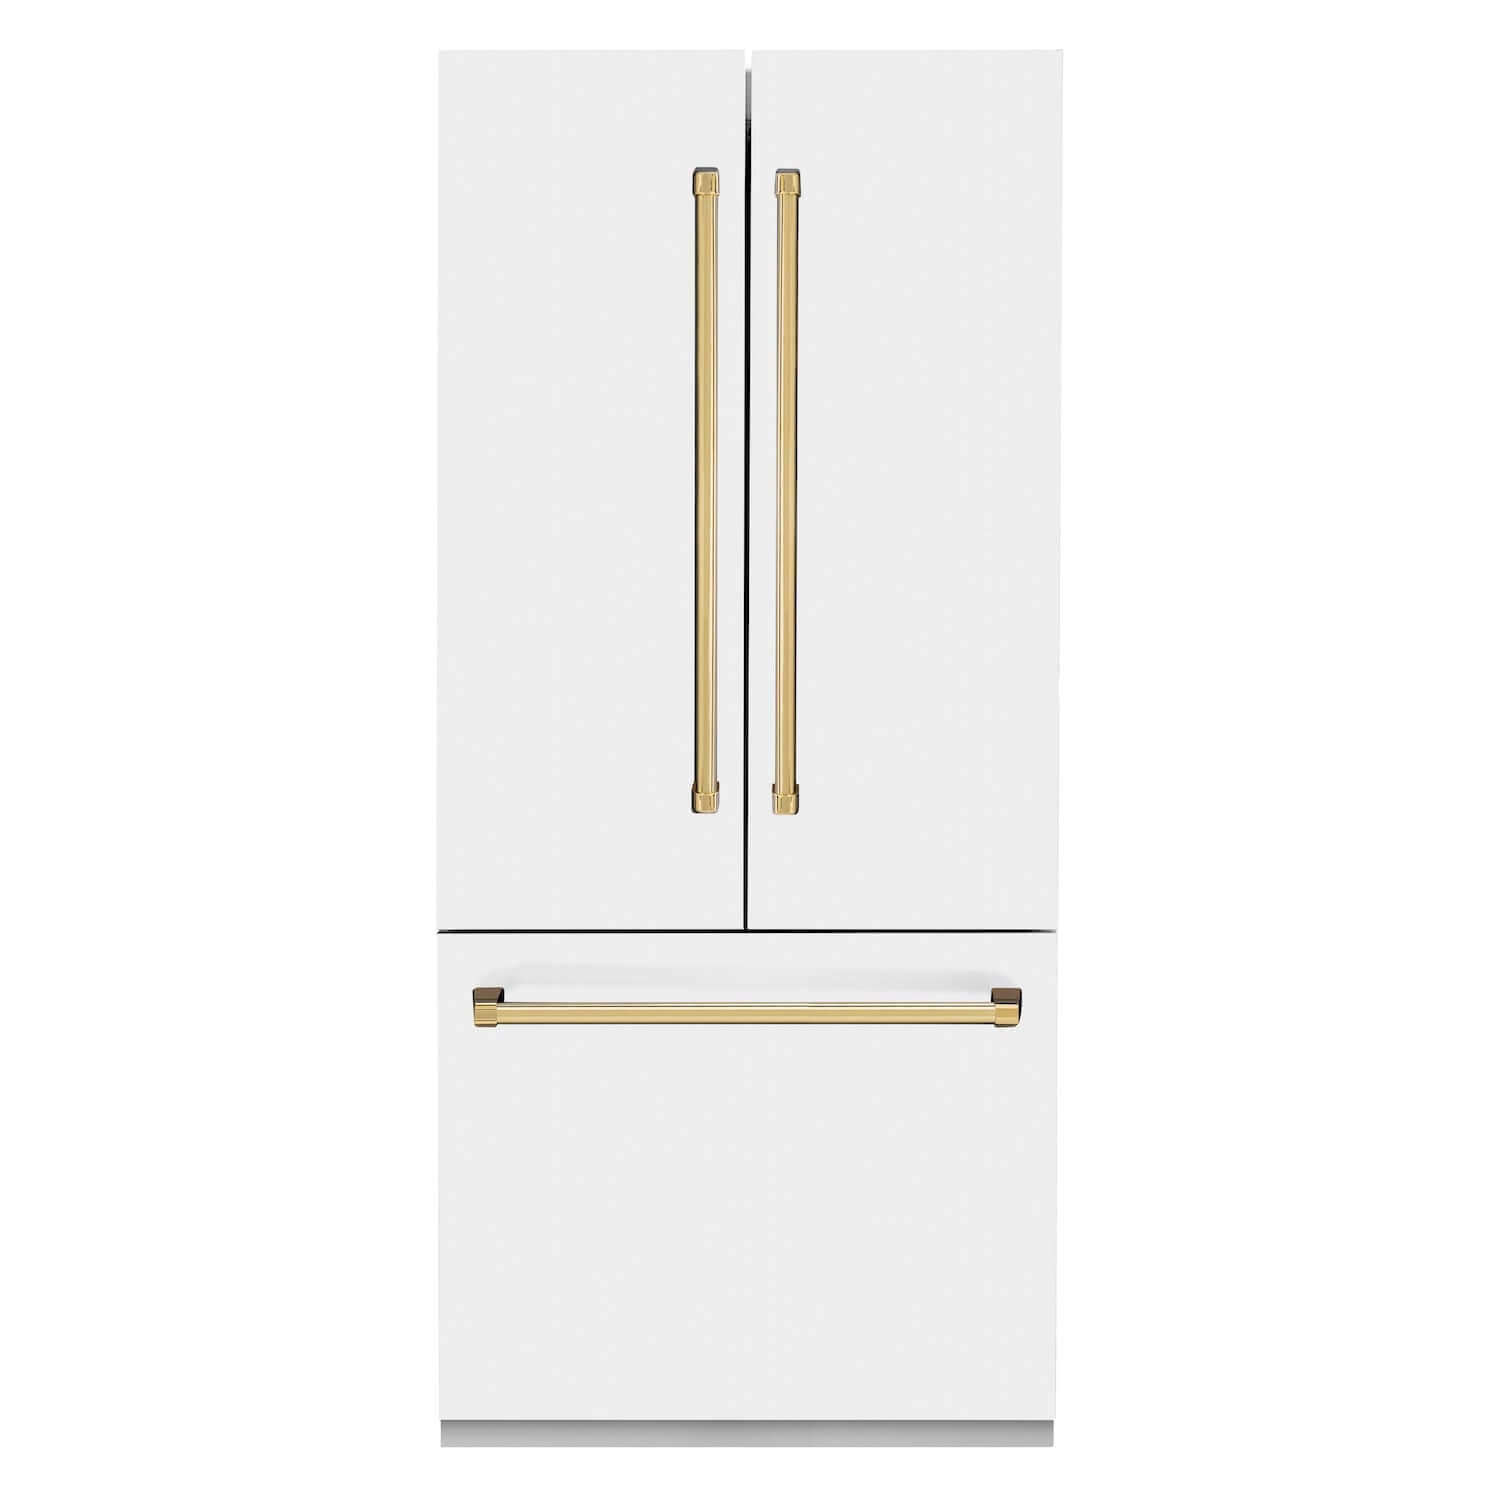 ZLINE 36 in. Autograph Edition Built-in Refrigerator in White Matte with Polished Gold Accents front.